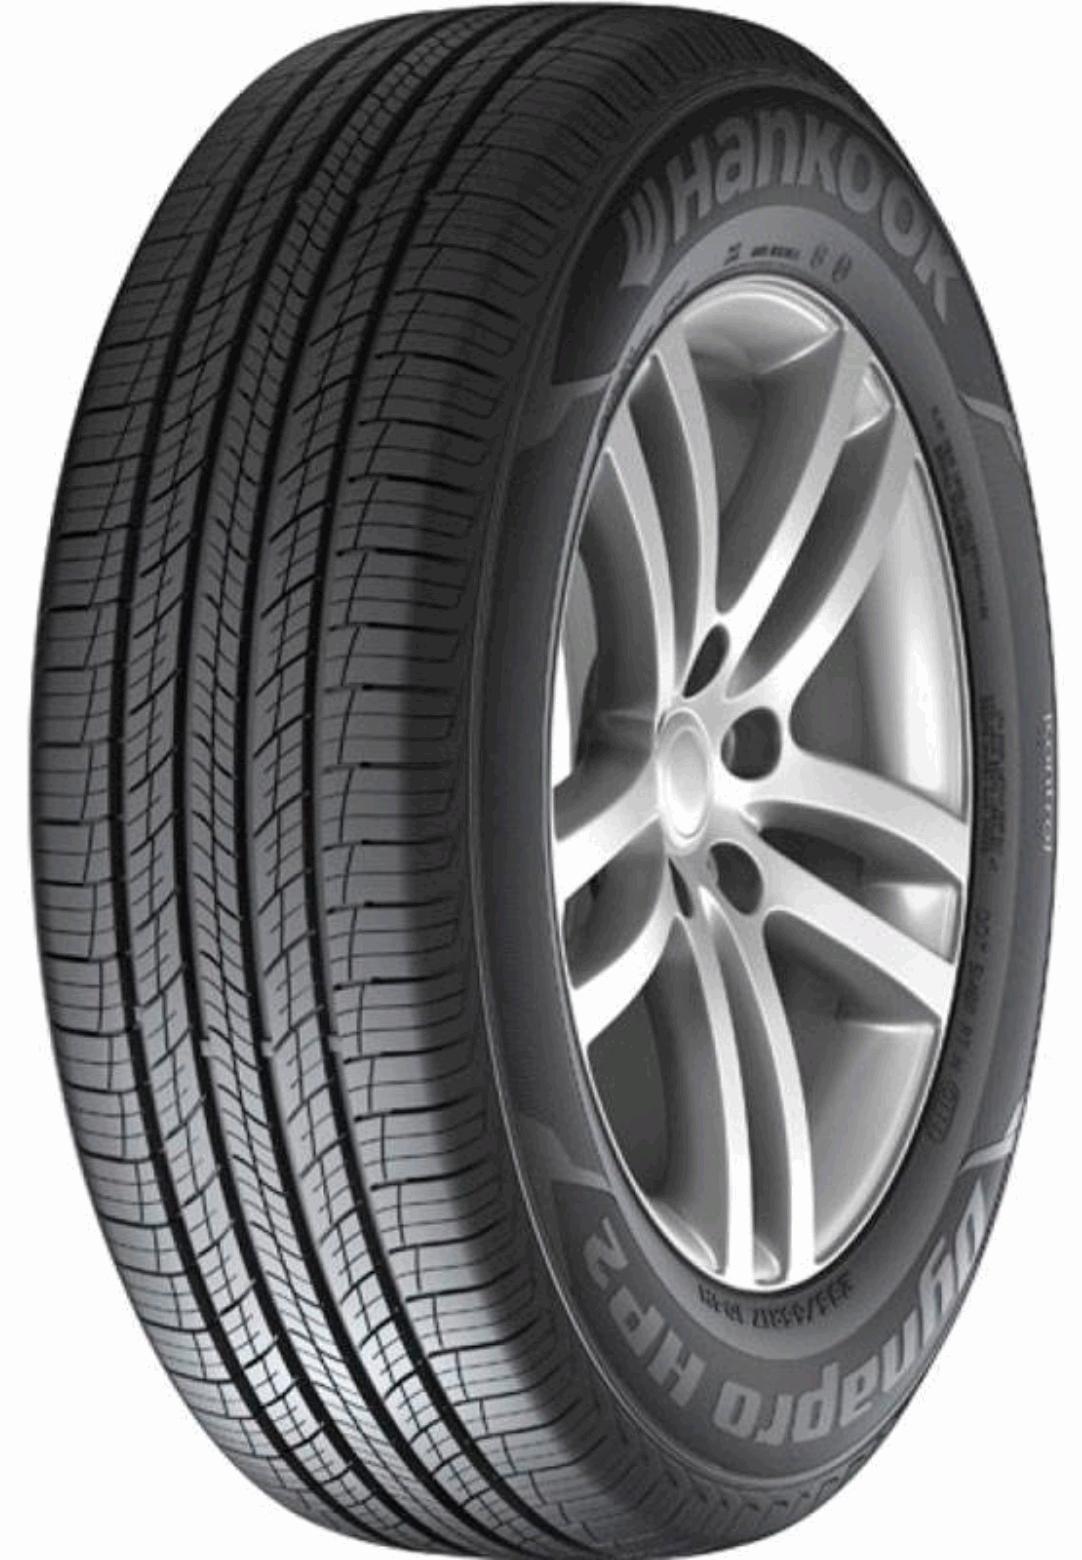 Hankook Dynapro HP2 RA33 - and Tire Reviews Tests